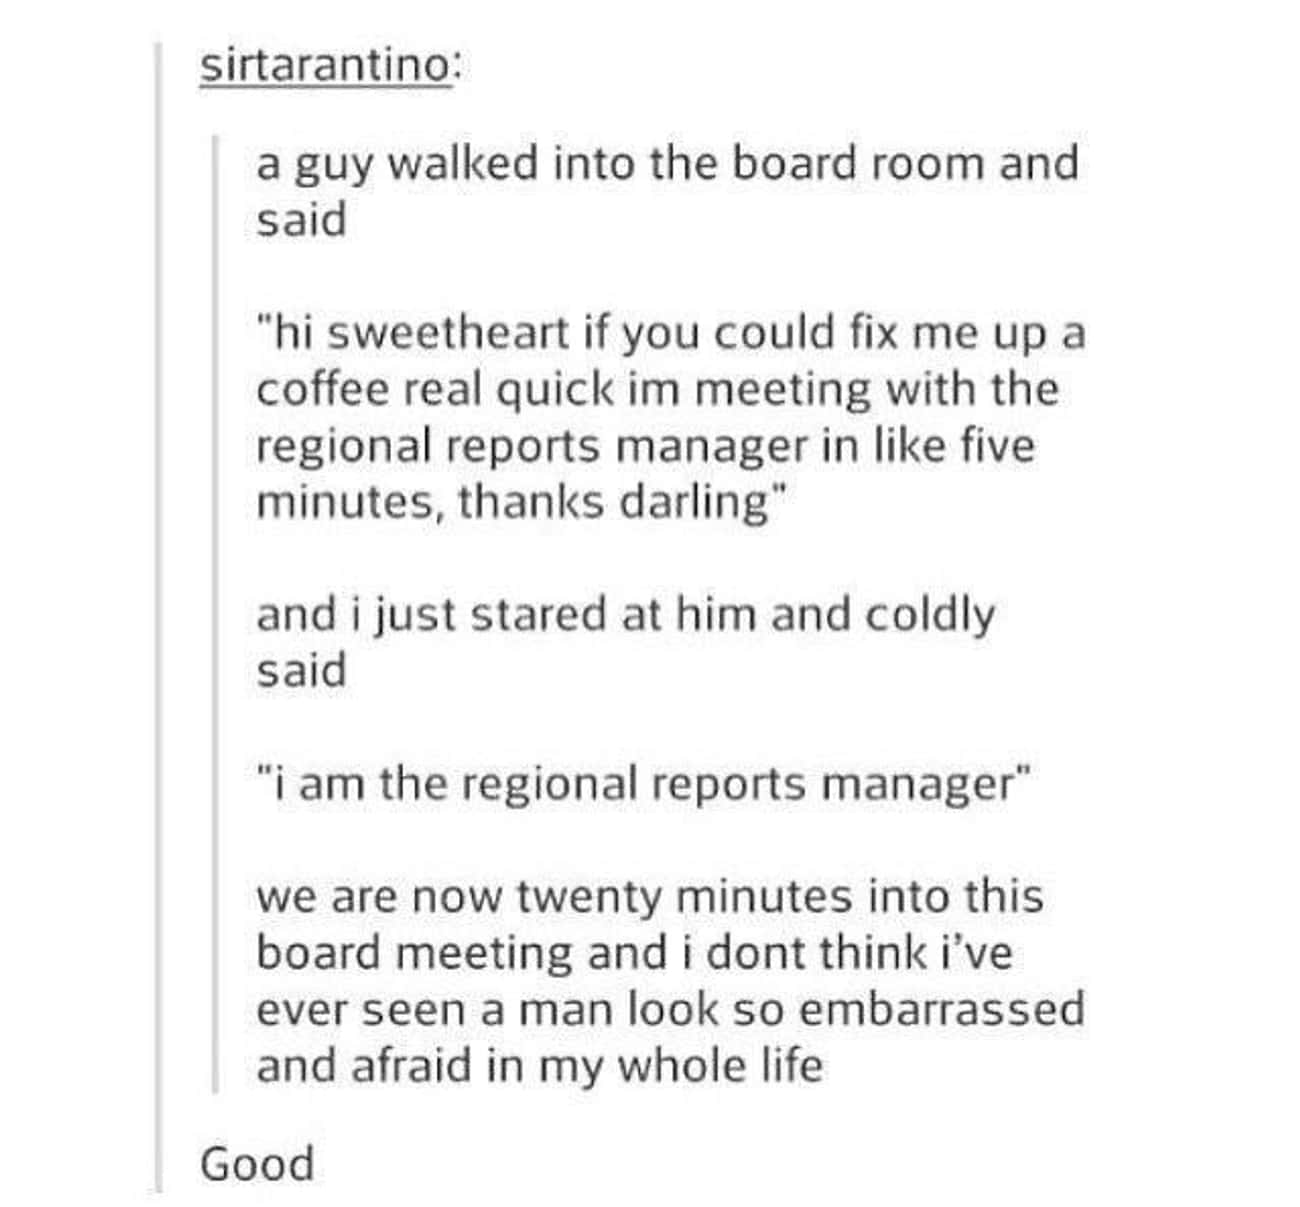 Man Claims To Be Waiting For Regional Reports Manager, Other Woman In The Room Is The Regional Reports Manager